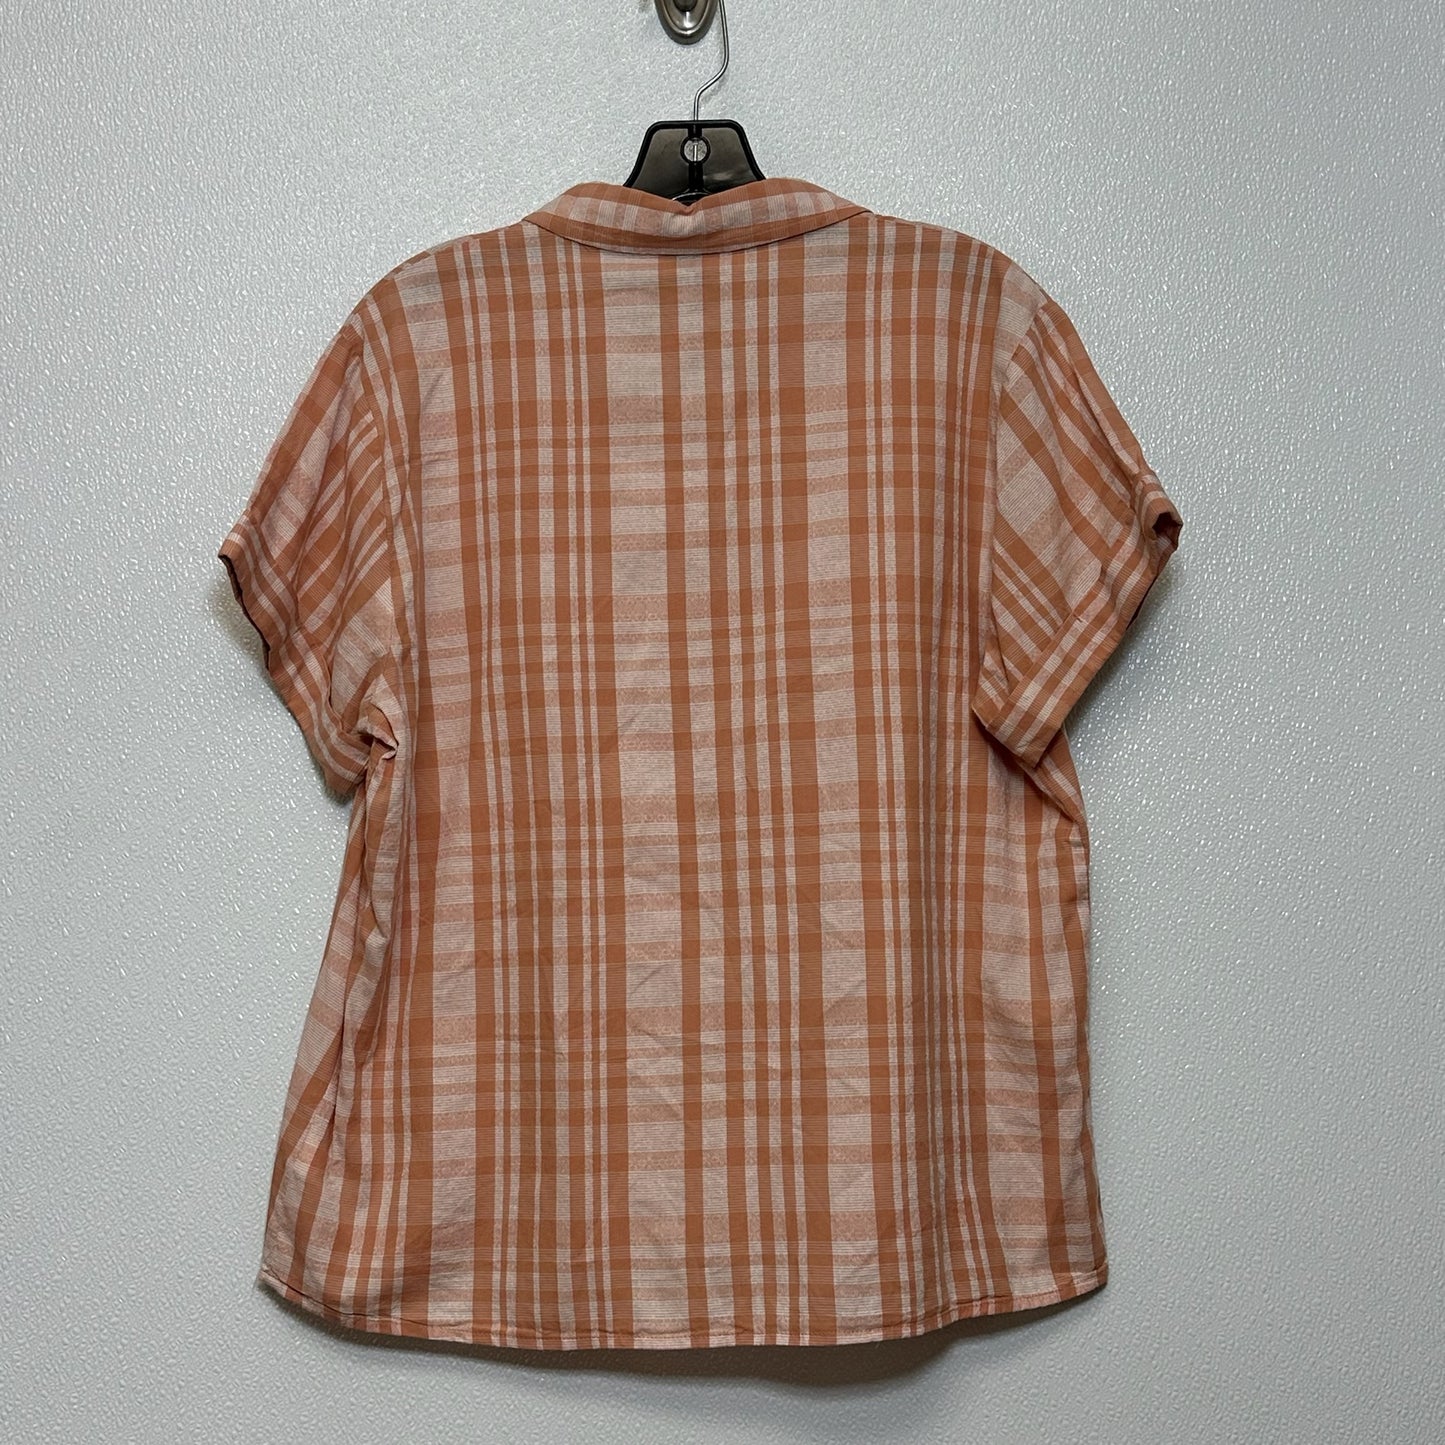 Top Short Sleeve Basic By Universal Thread size small